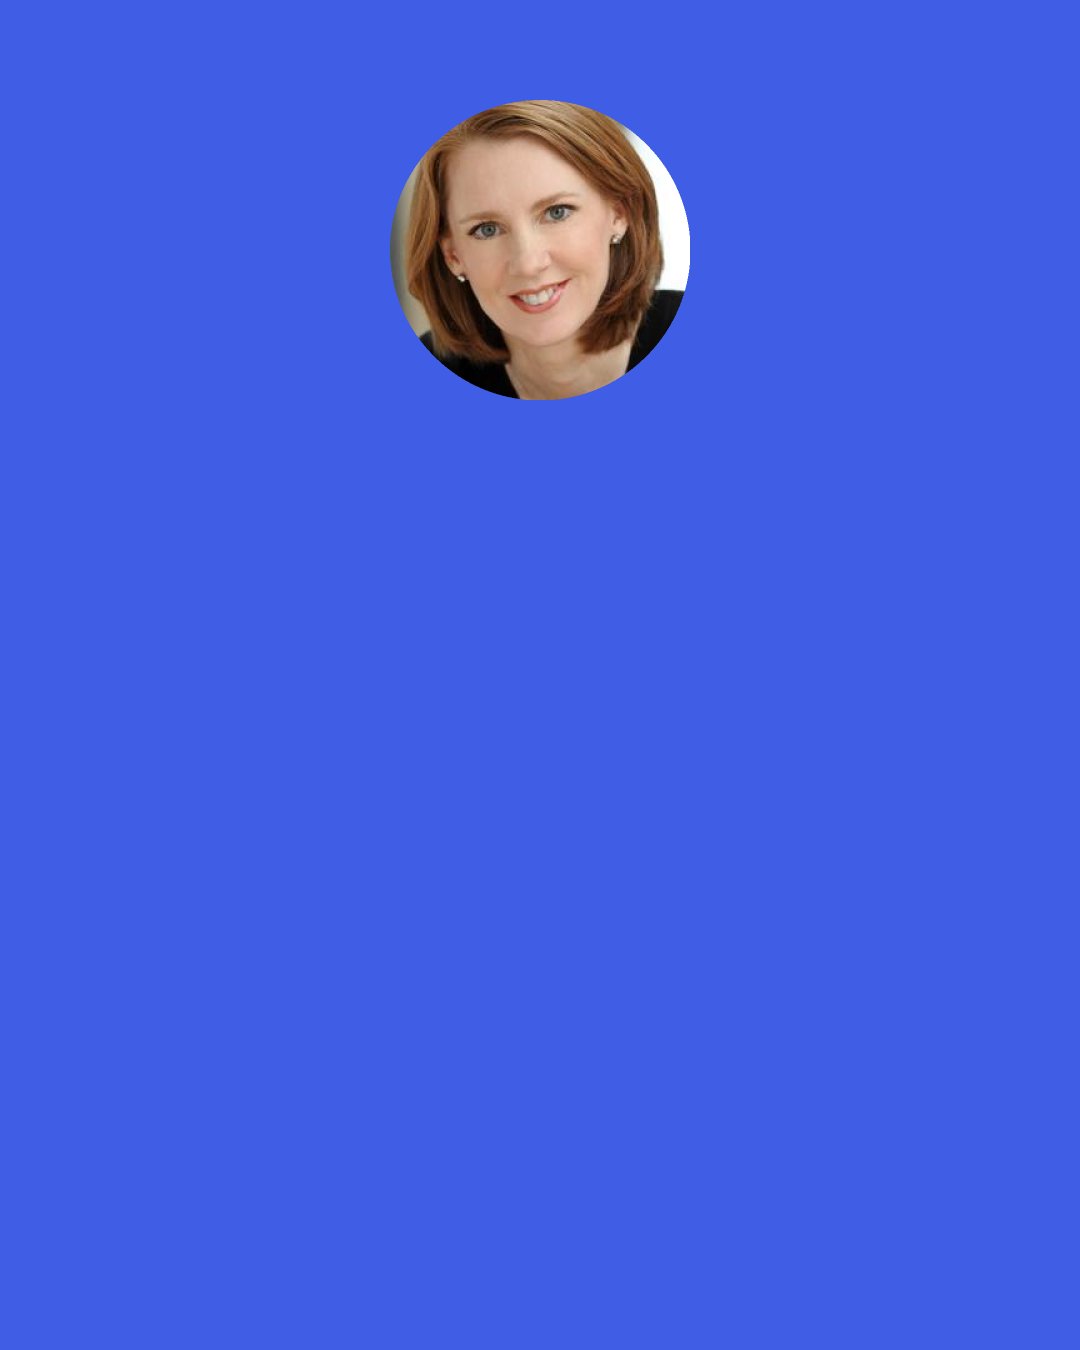 Gretchen Rubin: Happy people make people happy, but I can’t make someone be happy, and no one else can make me happy.